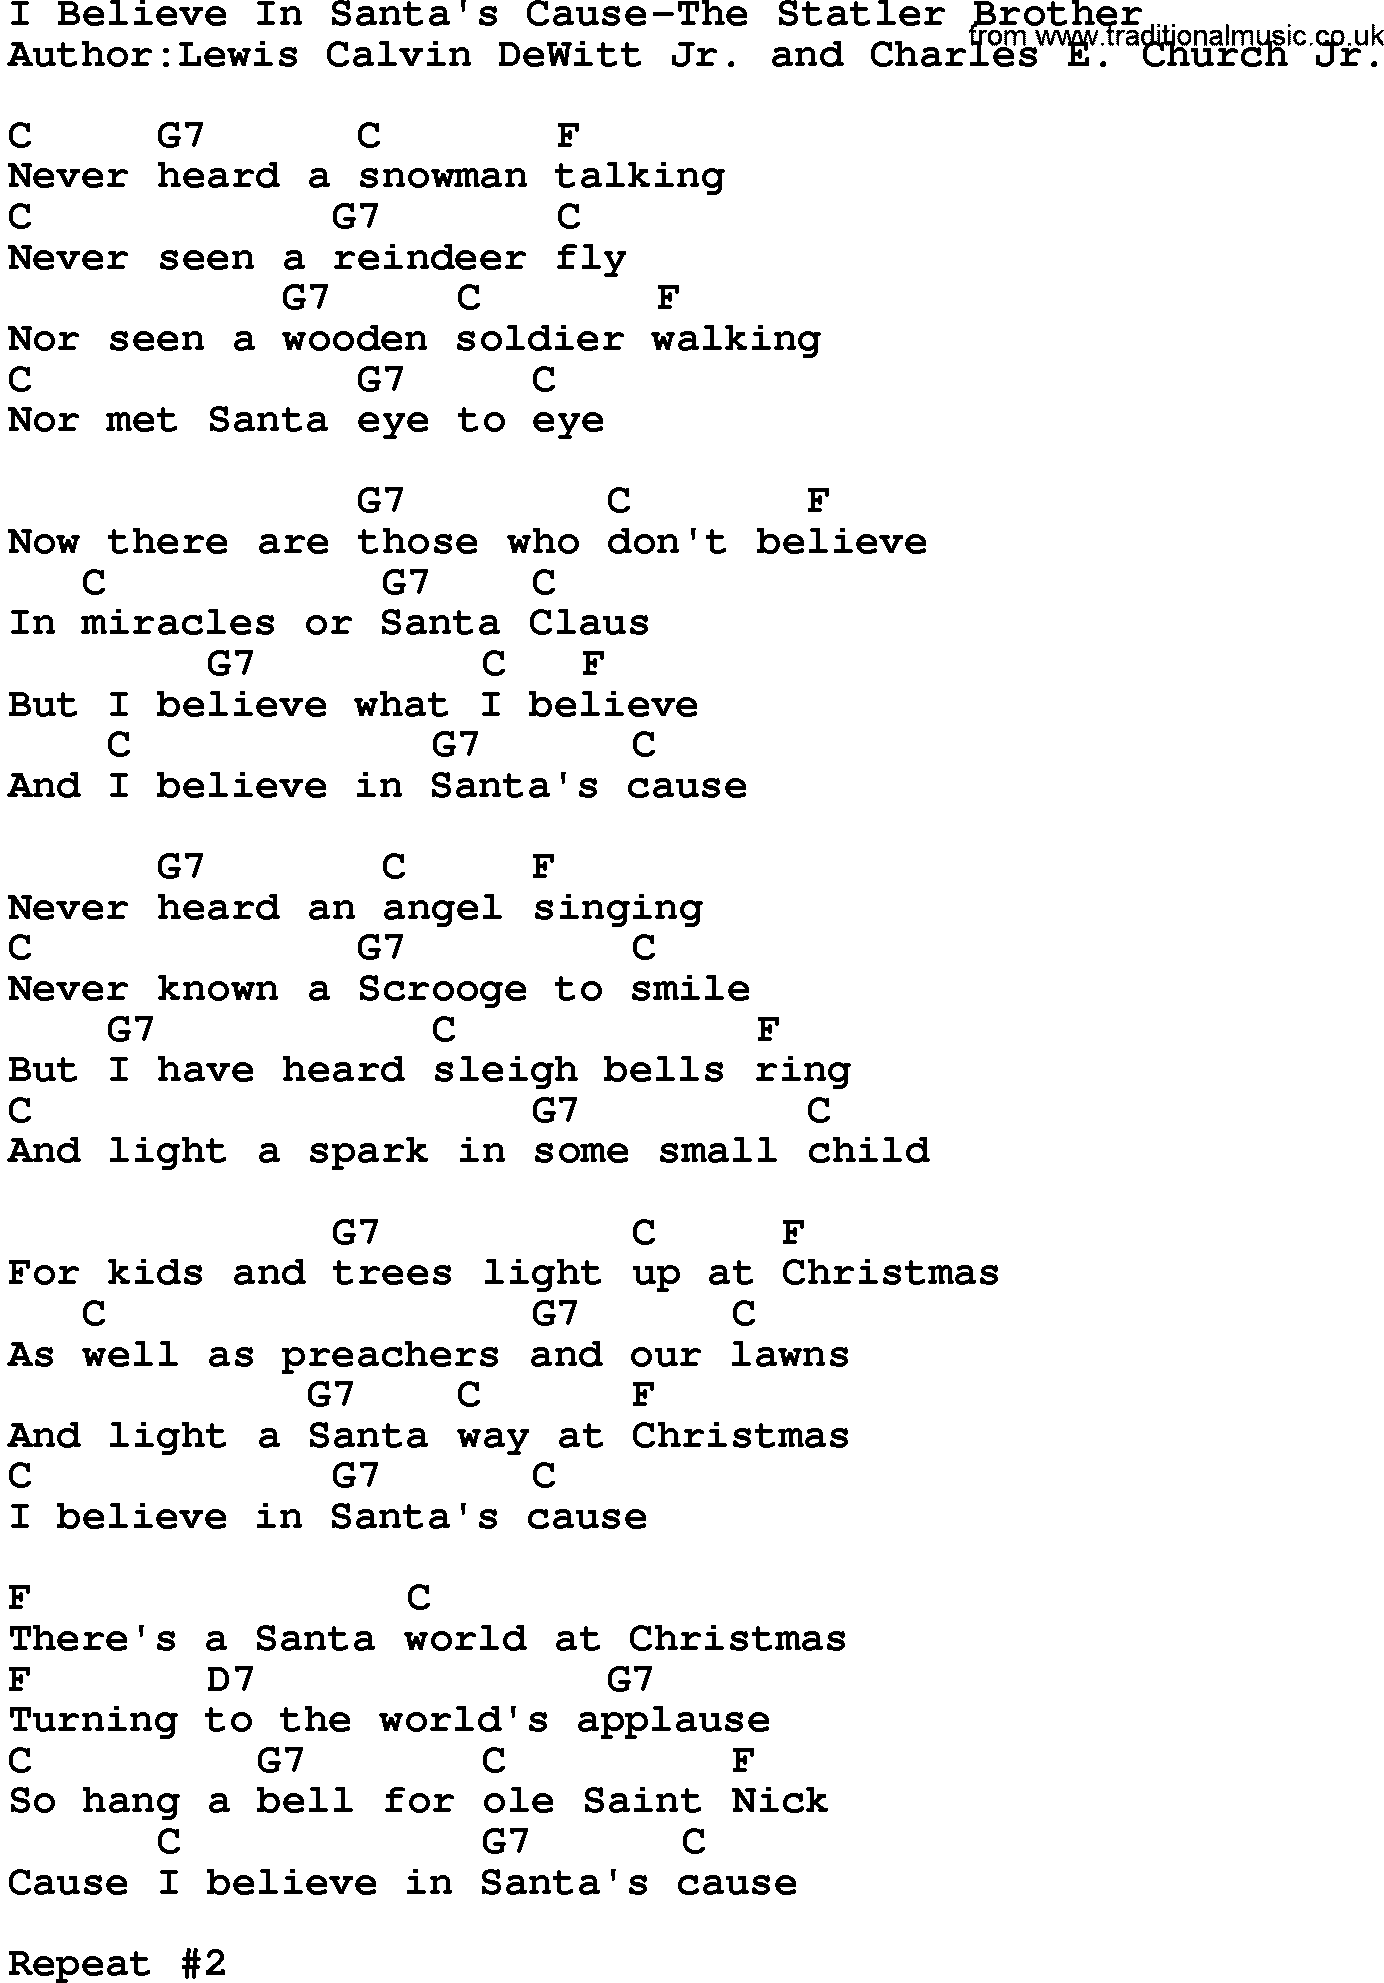 Country music song: I Believe In Santa's Cause-The Statler Brother lyrics and chords